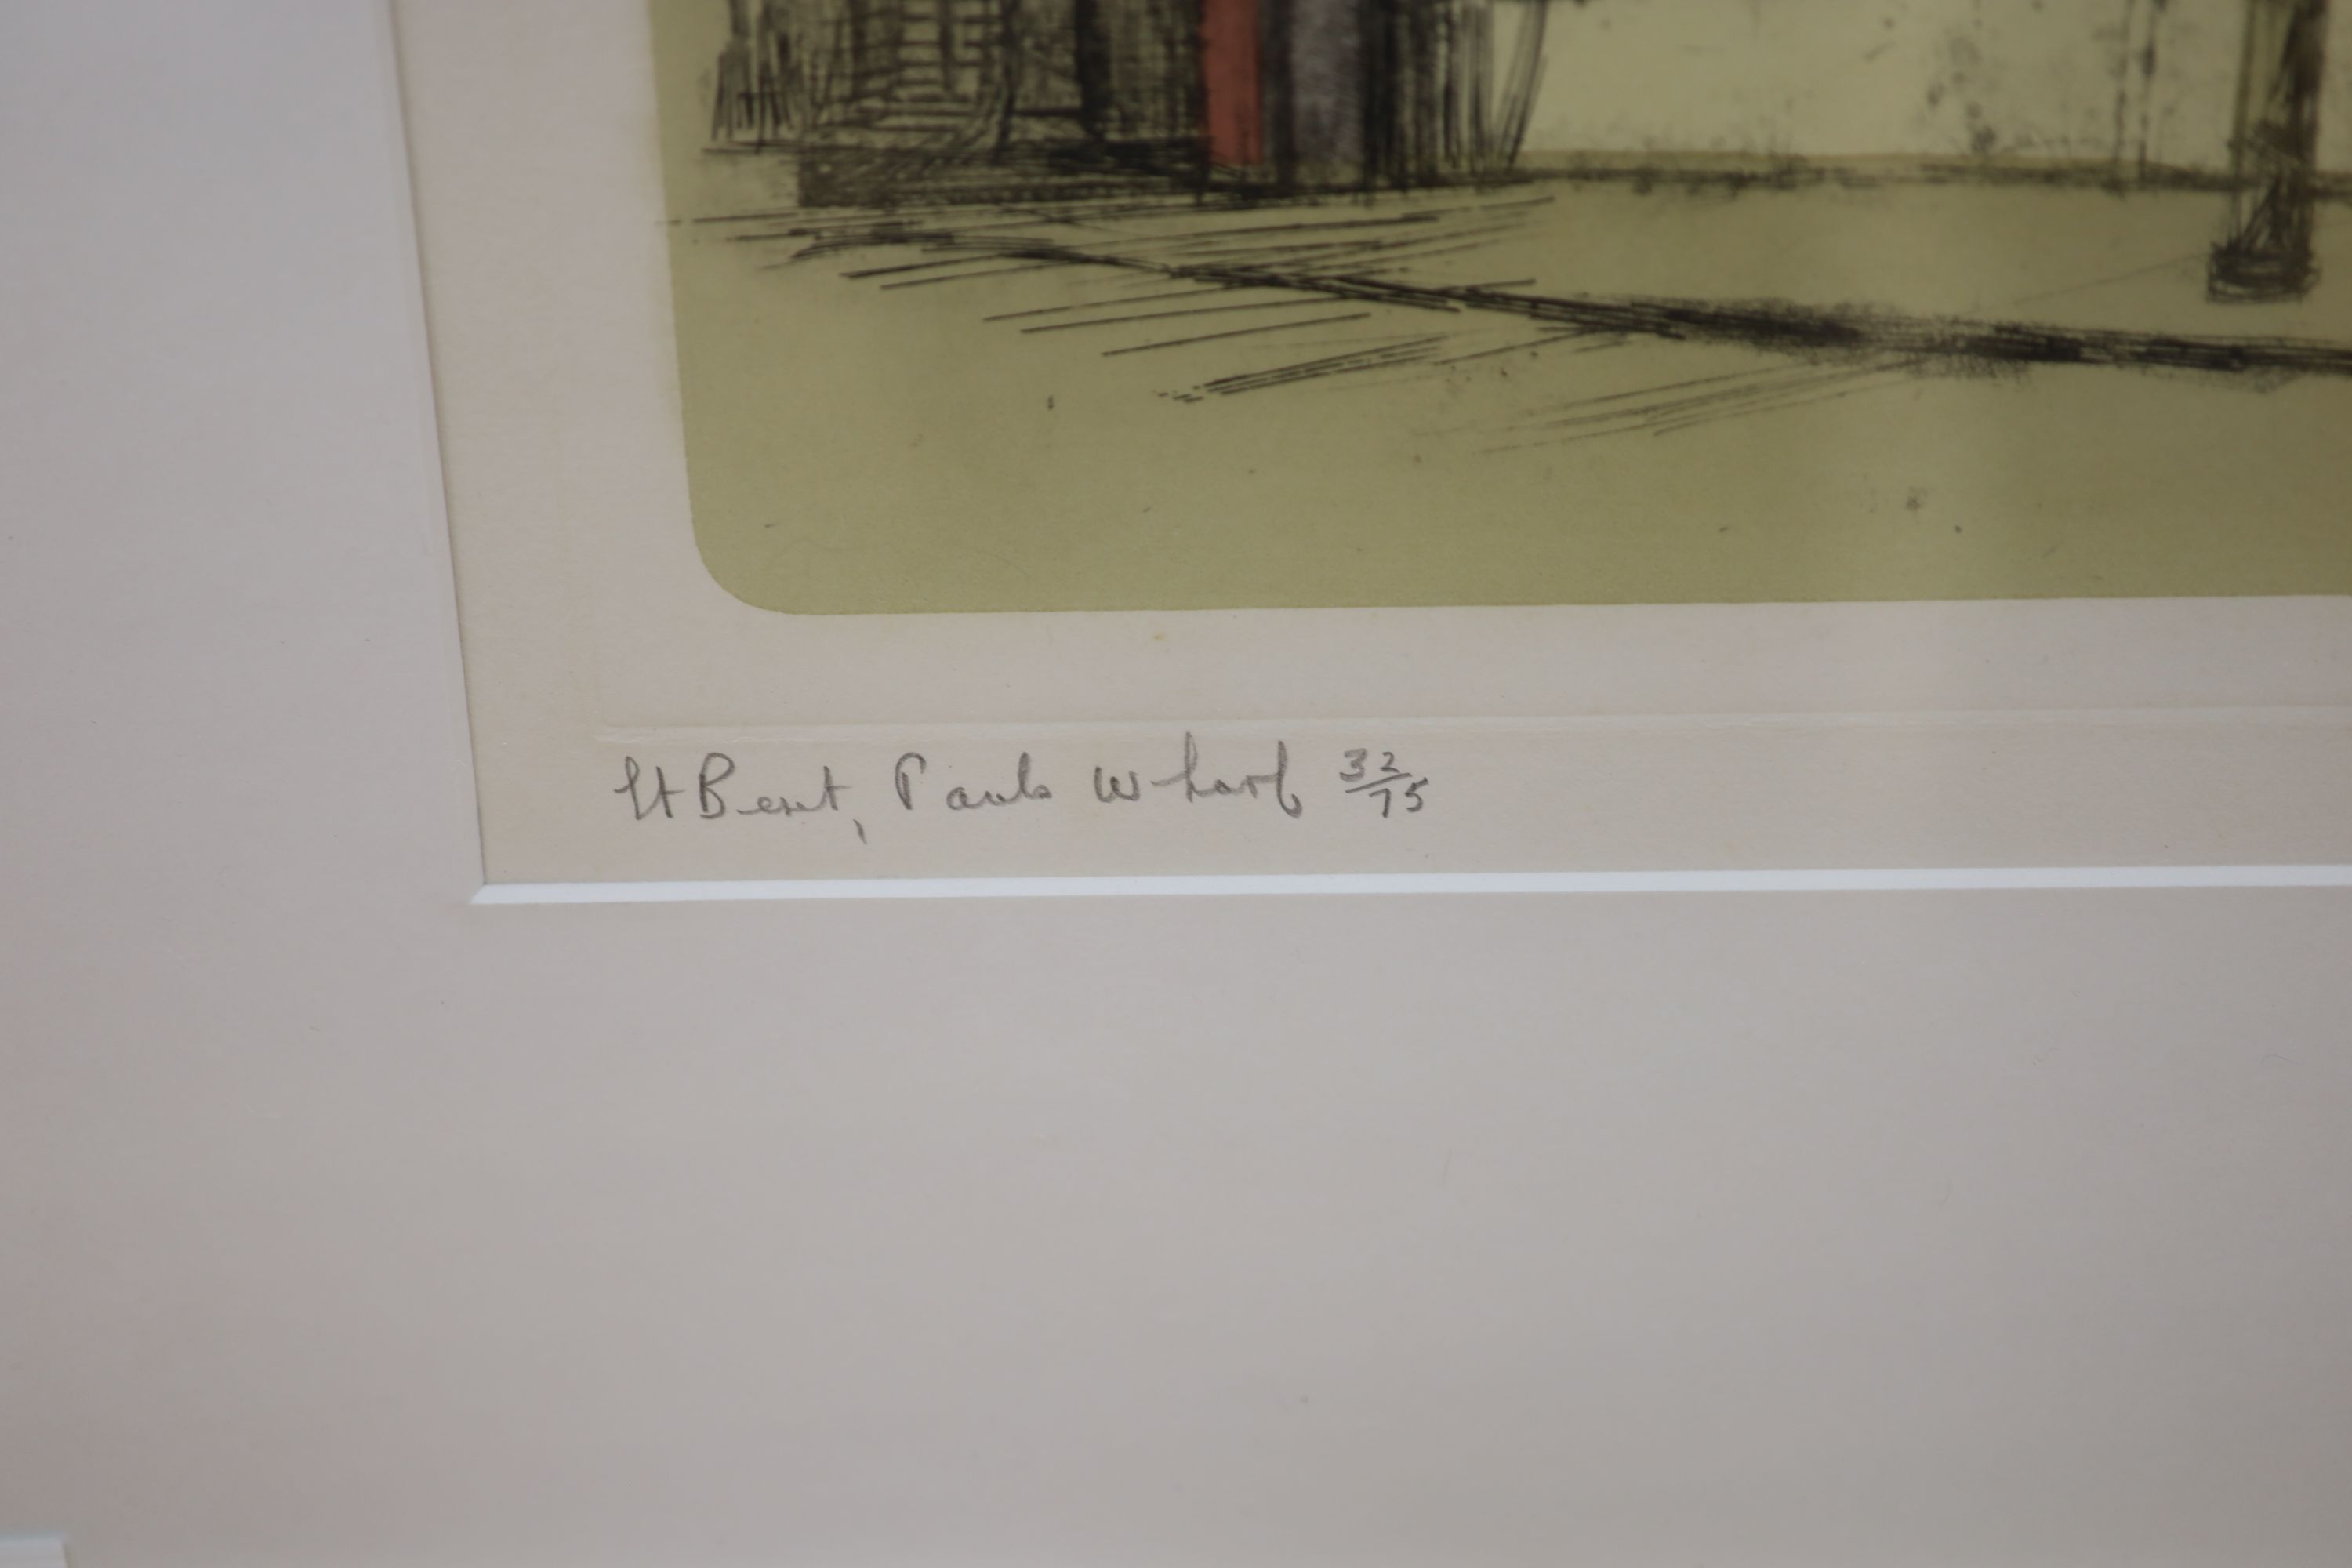 Richard Beer, coloured etching with aquatints, Pauls Wharf, signed in pencil, 32/75, 60 x 40cm